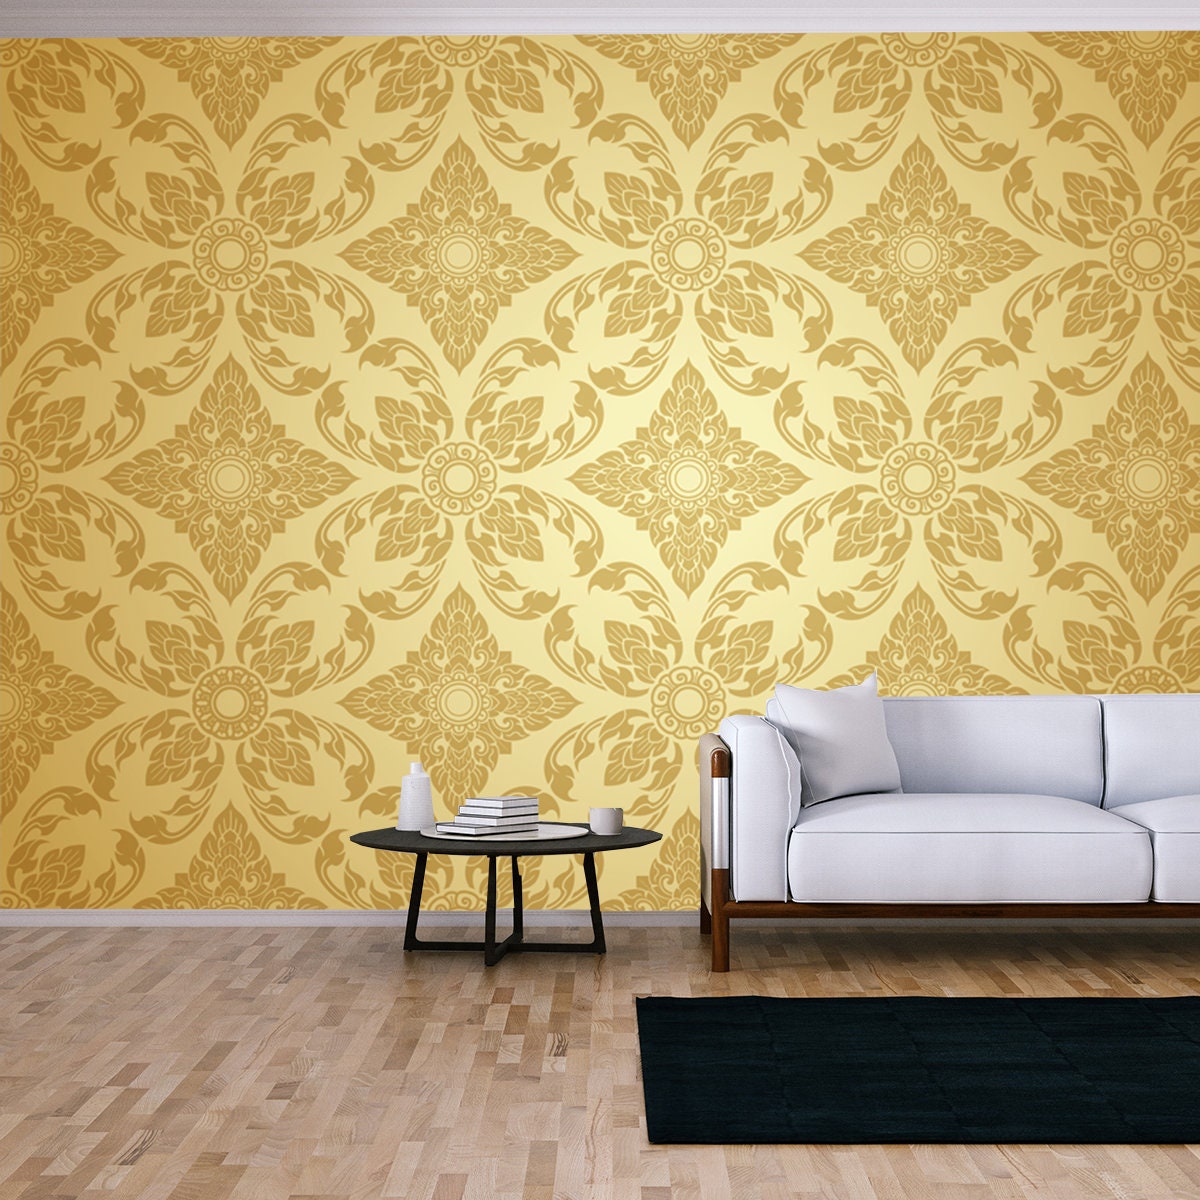 Thai Art and Asian Style Luxury Banner Gold Background Wallpaper Living Room Mural